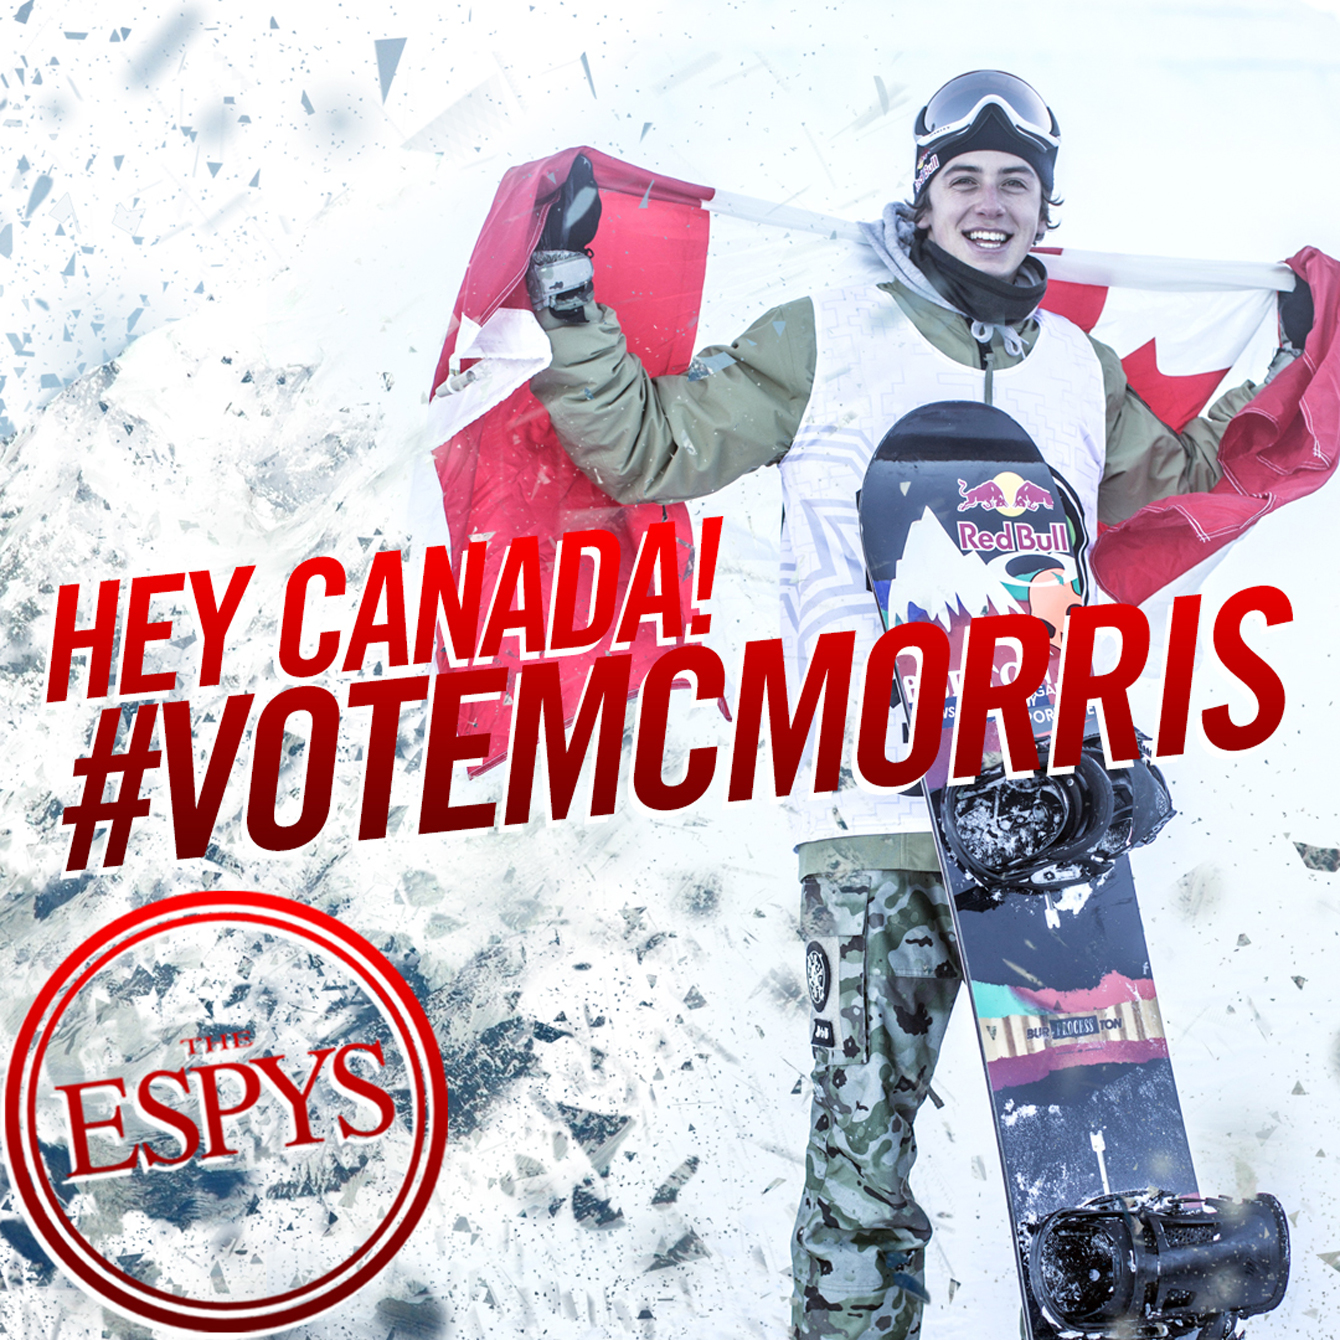 Snowboarder Mark McMorris has been nominated for the Best Male Action Sports Athlete at the 2016 ESPY Awards.